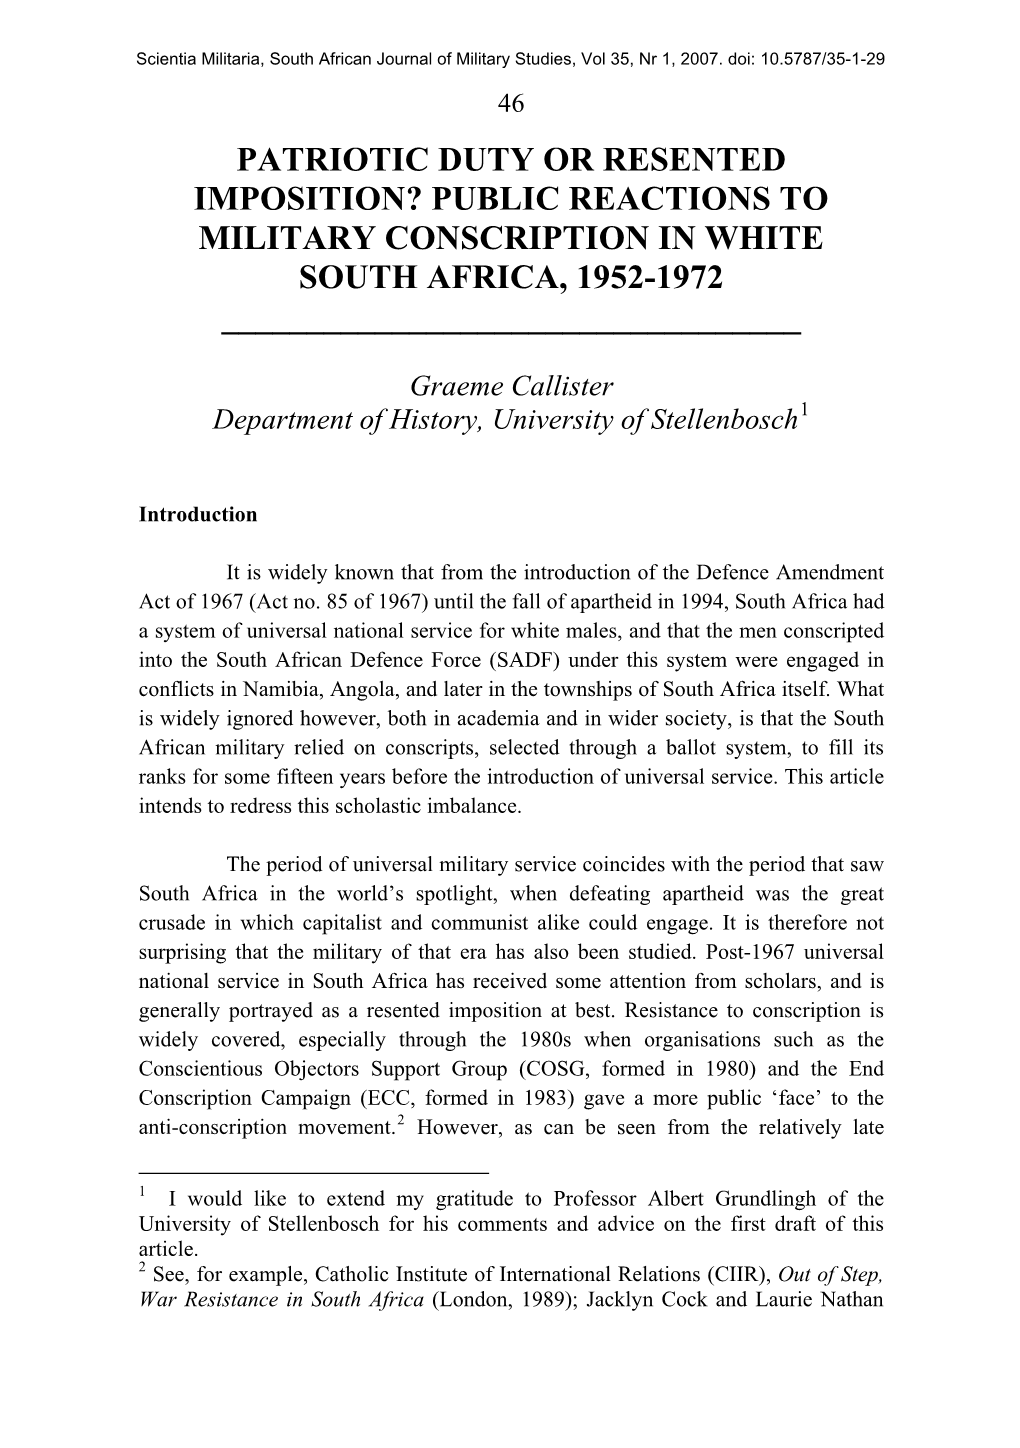 Military Conscription in South Africa, 1952-1972